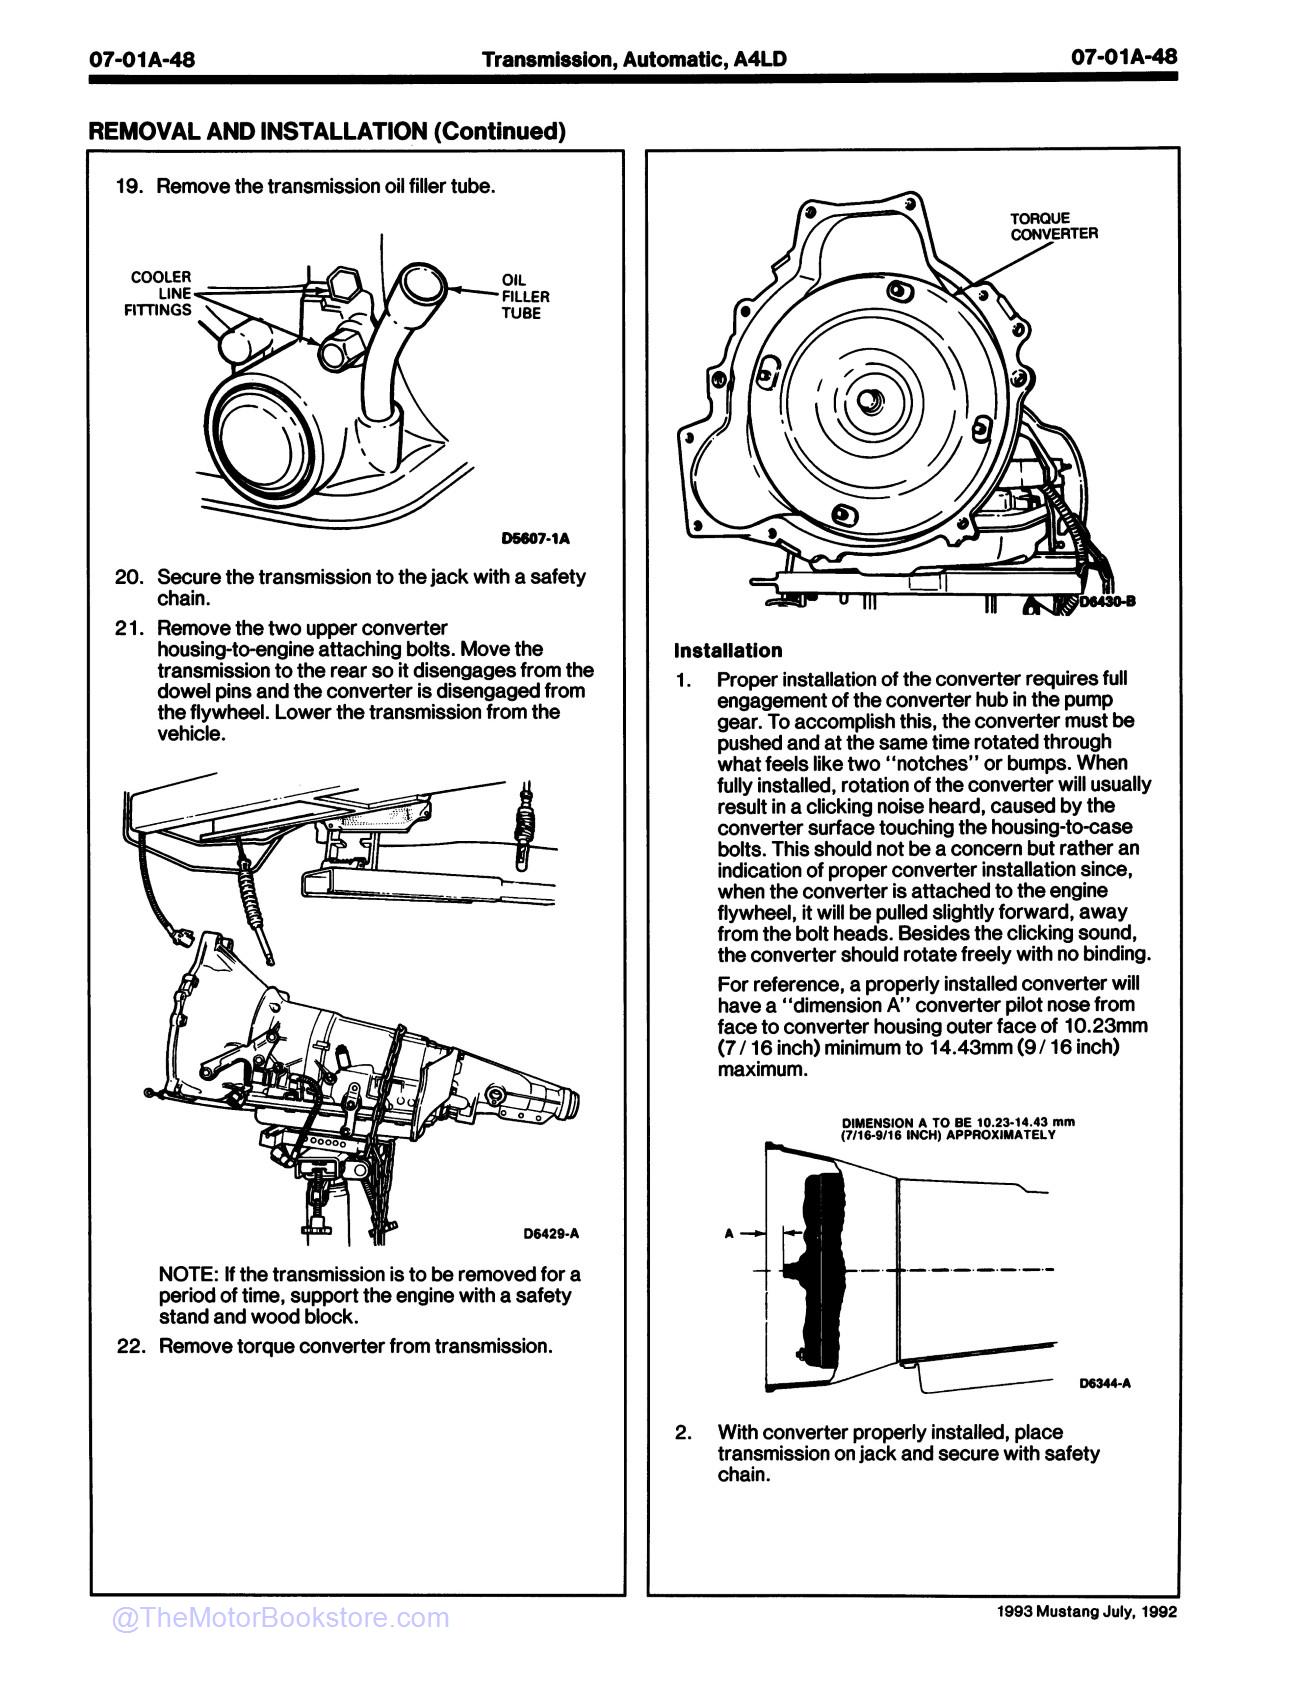 1993 Ford Mustang Service Manual - Sample Page 2